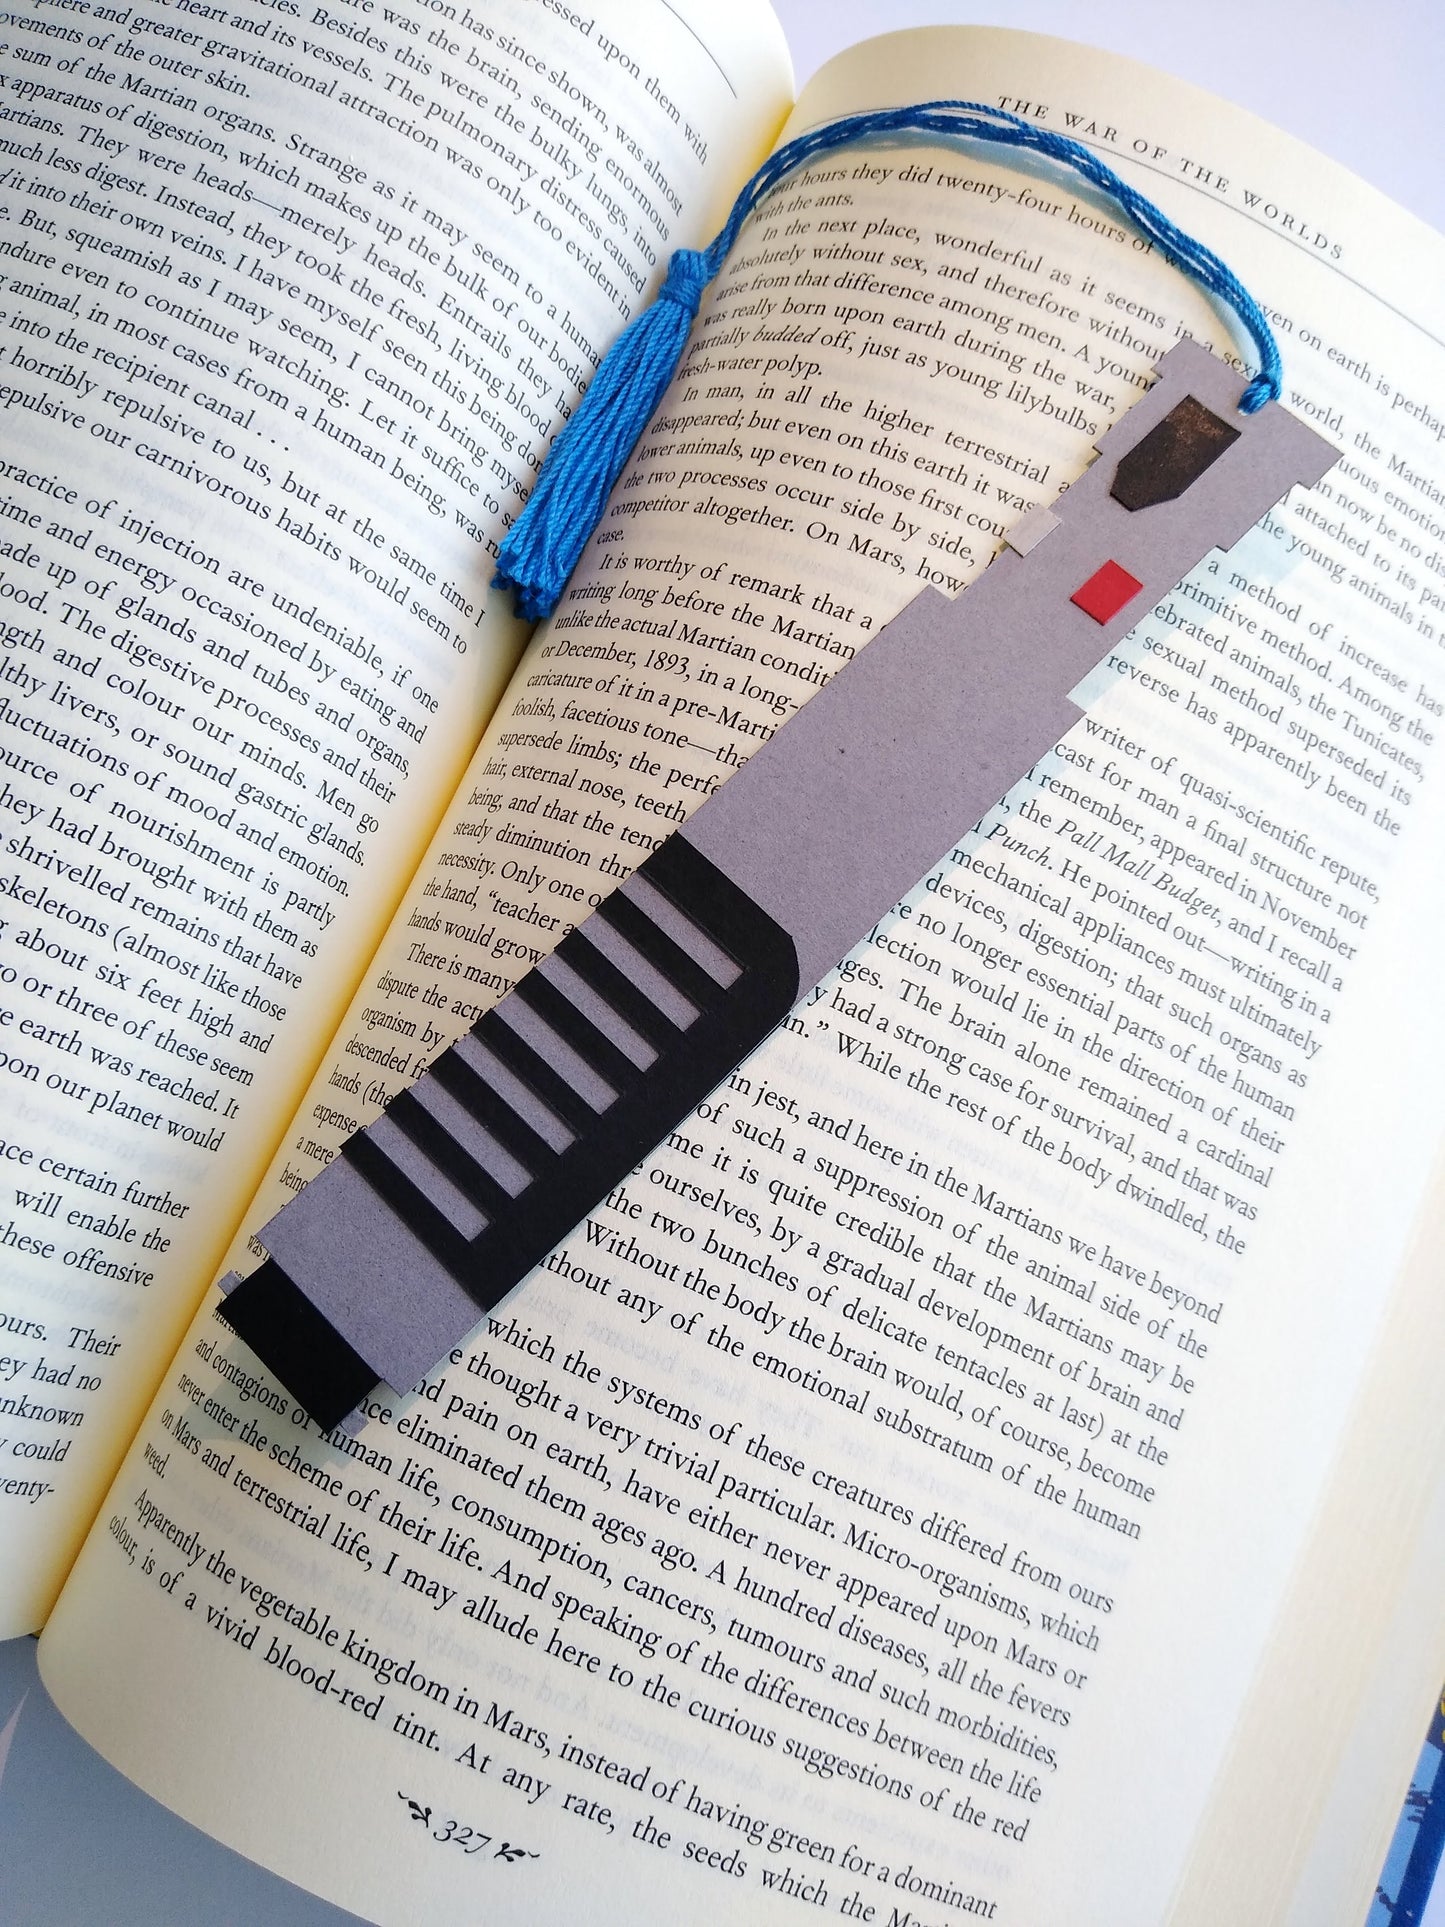 A bookmark designed like the handle of Obi-Wan Kenobi's lightsaber rests on top of an open book. The blue tassel curls around and rests in dip between the pages.